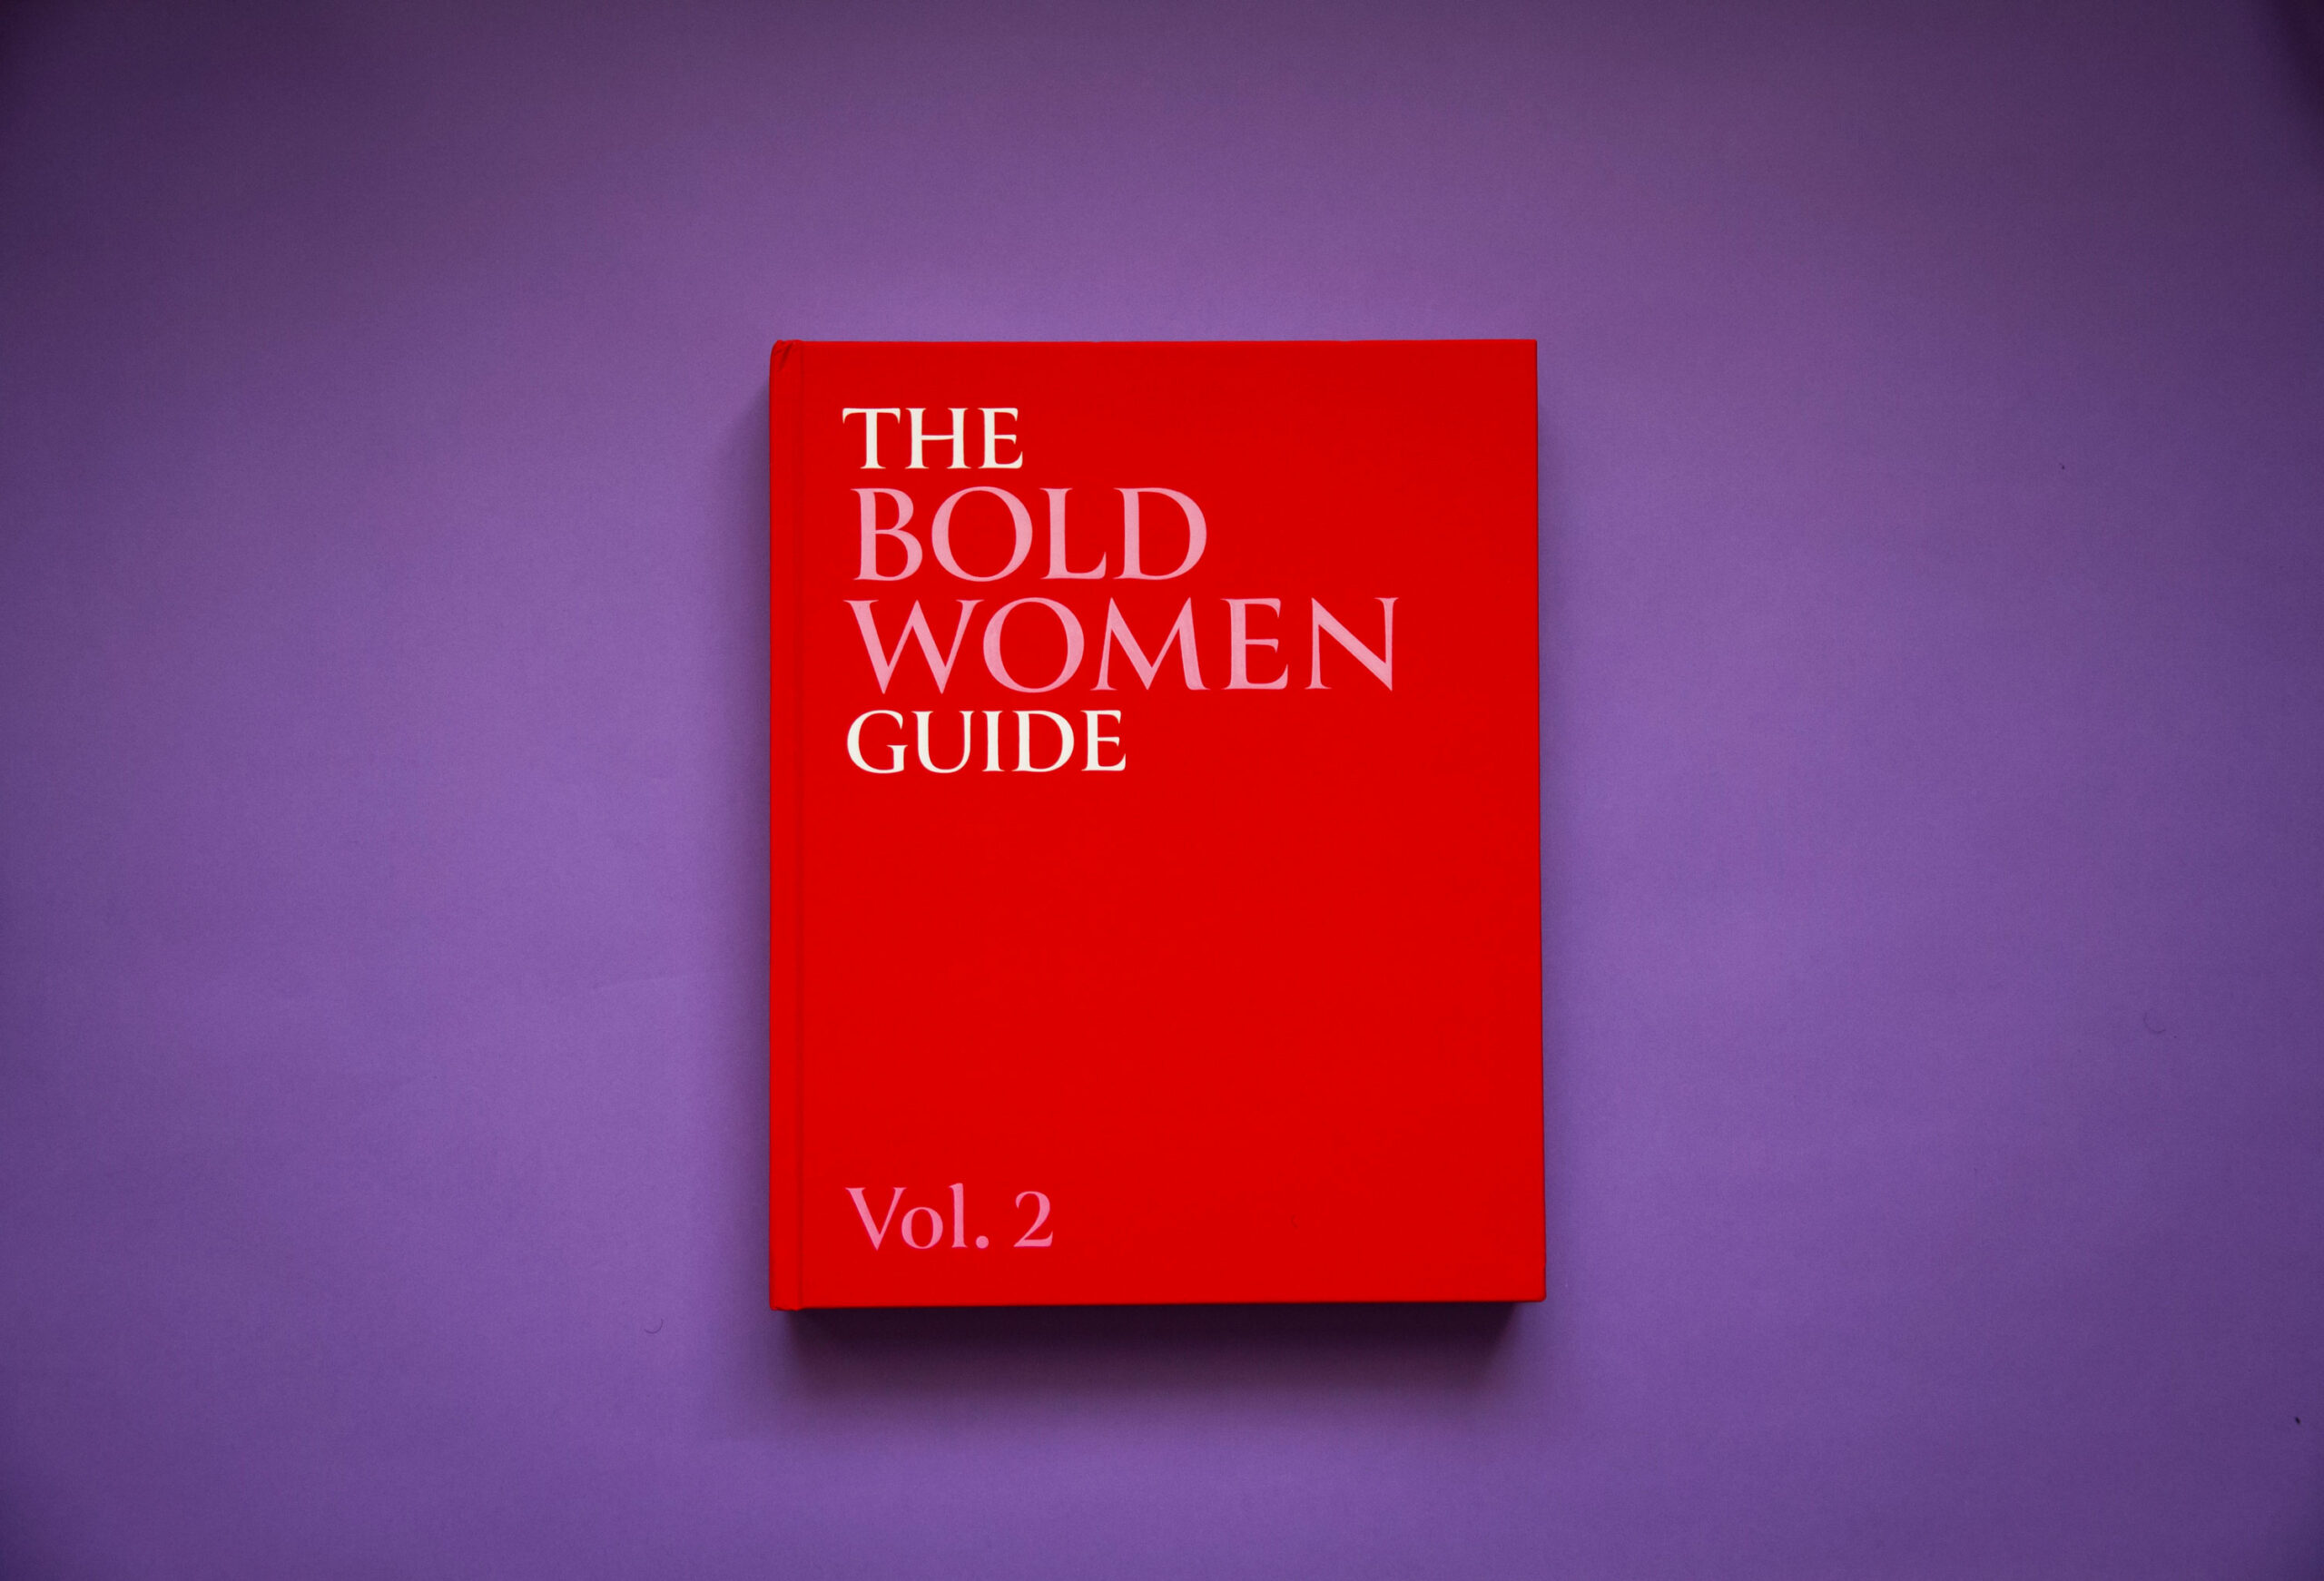 Image of the bold book featuring a red cover